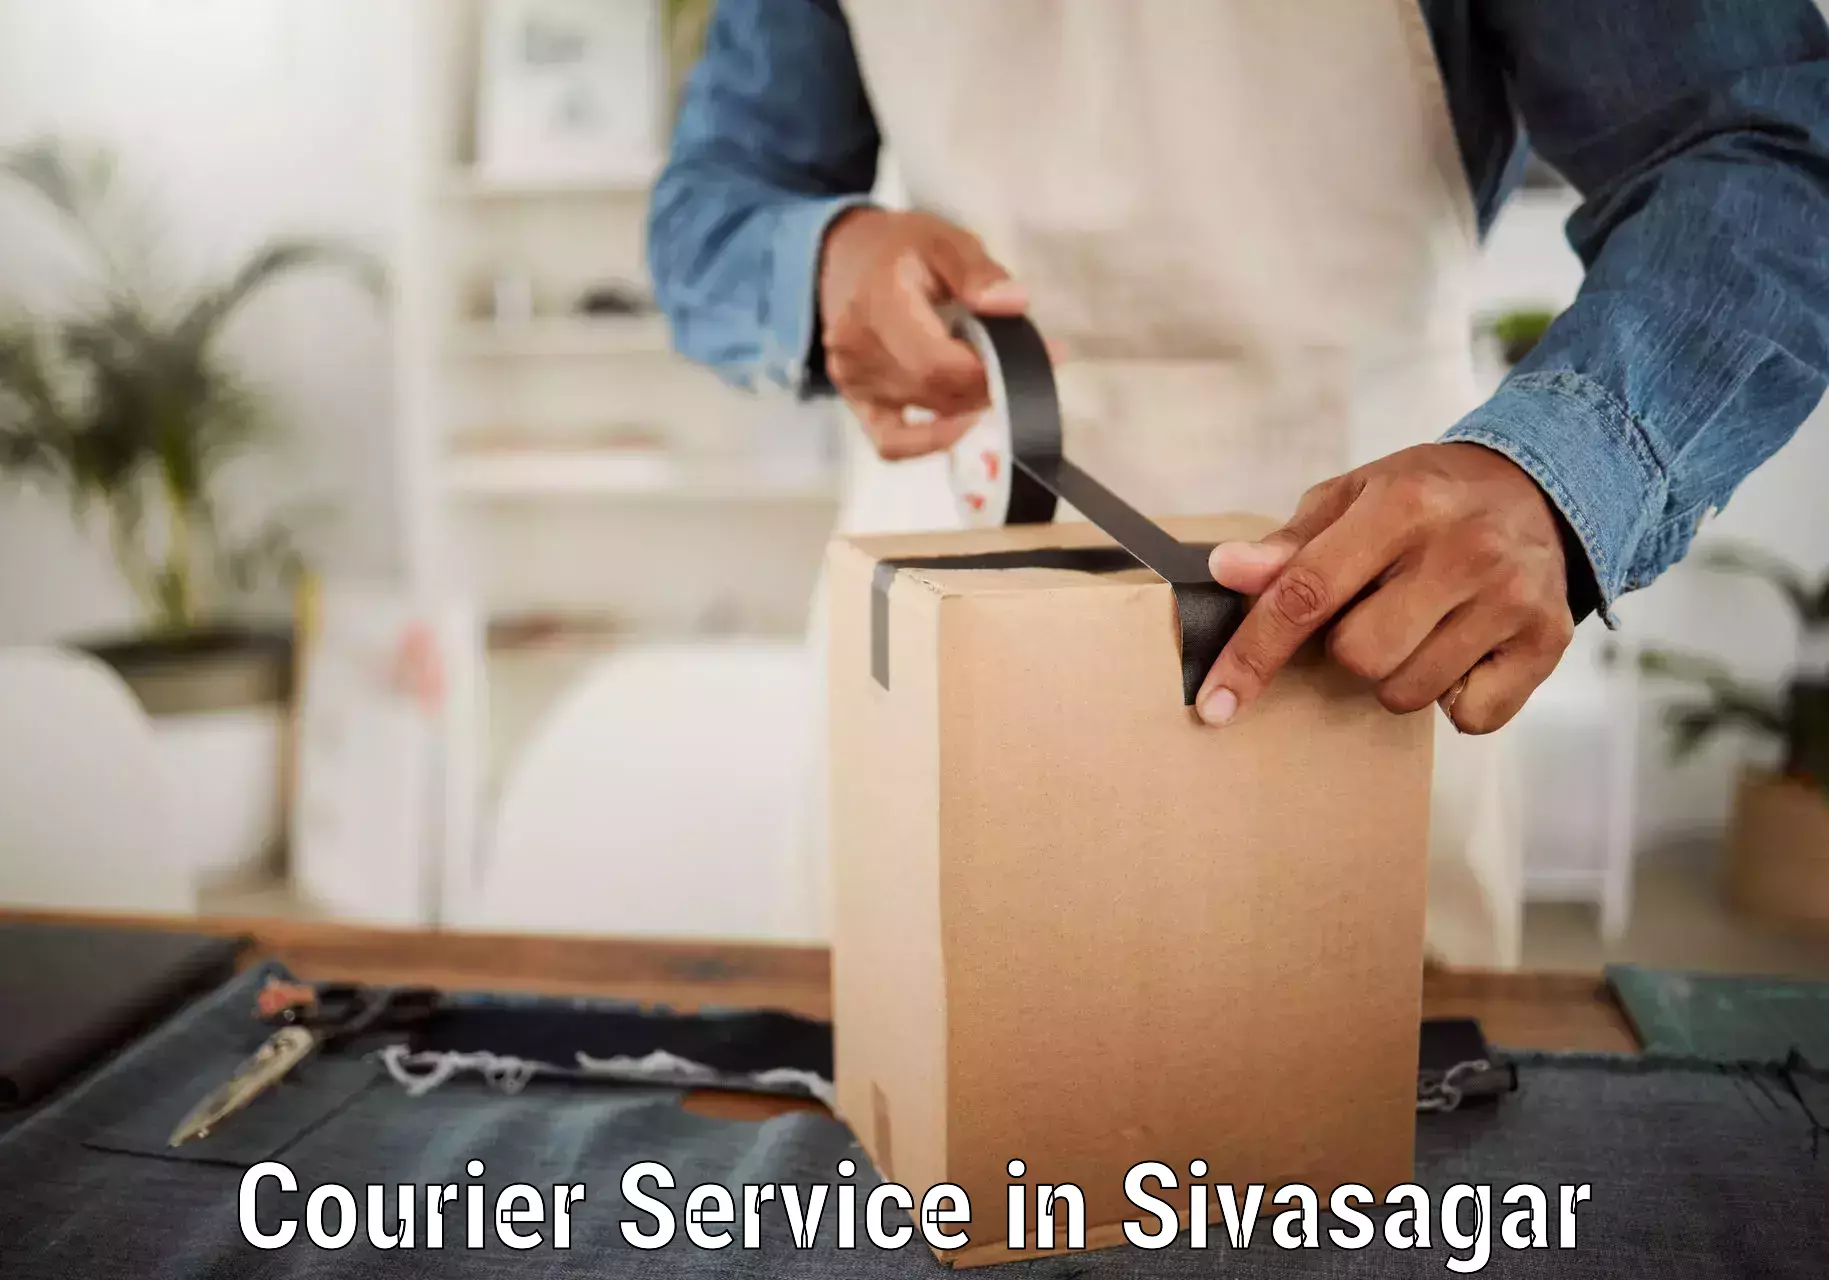 Specialized courier services in Sivasagar